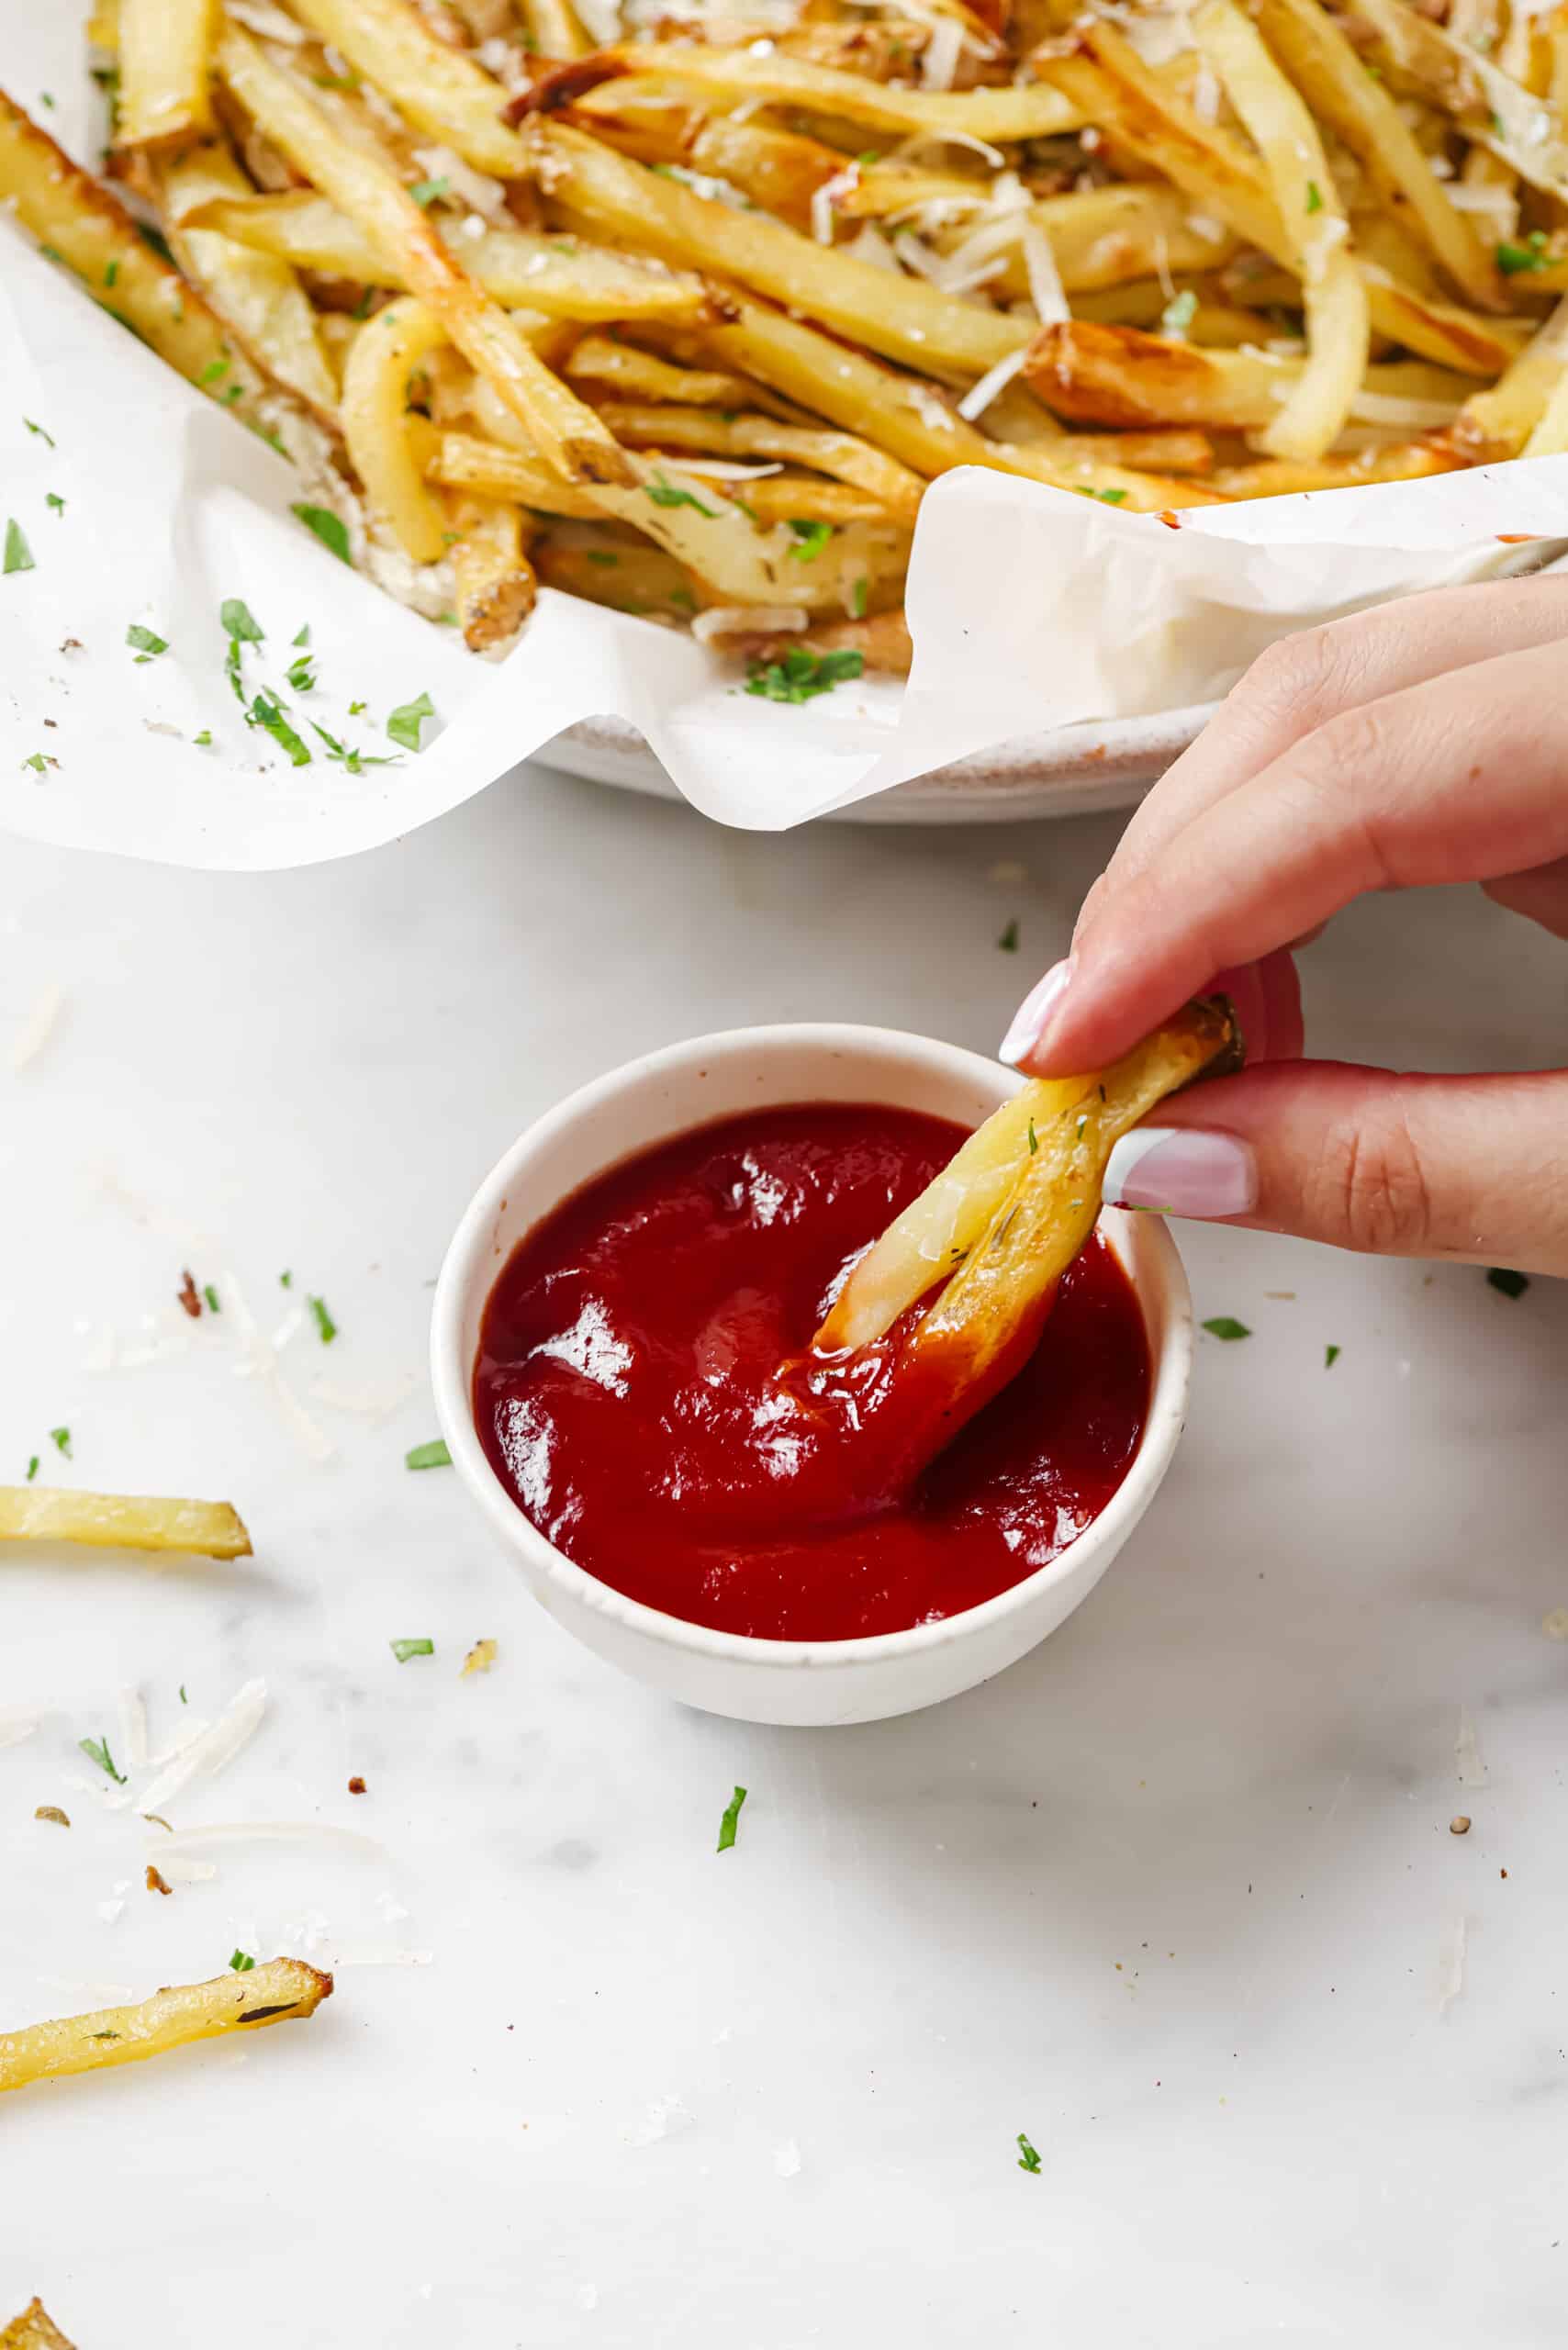 Dipping a french fry into ketchup. 